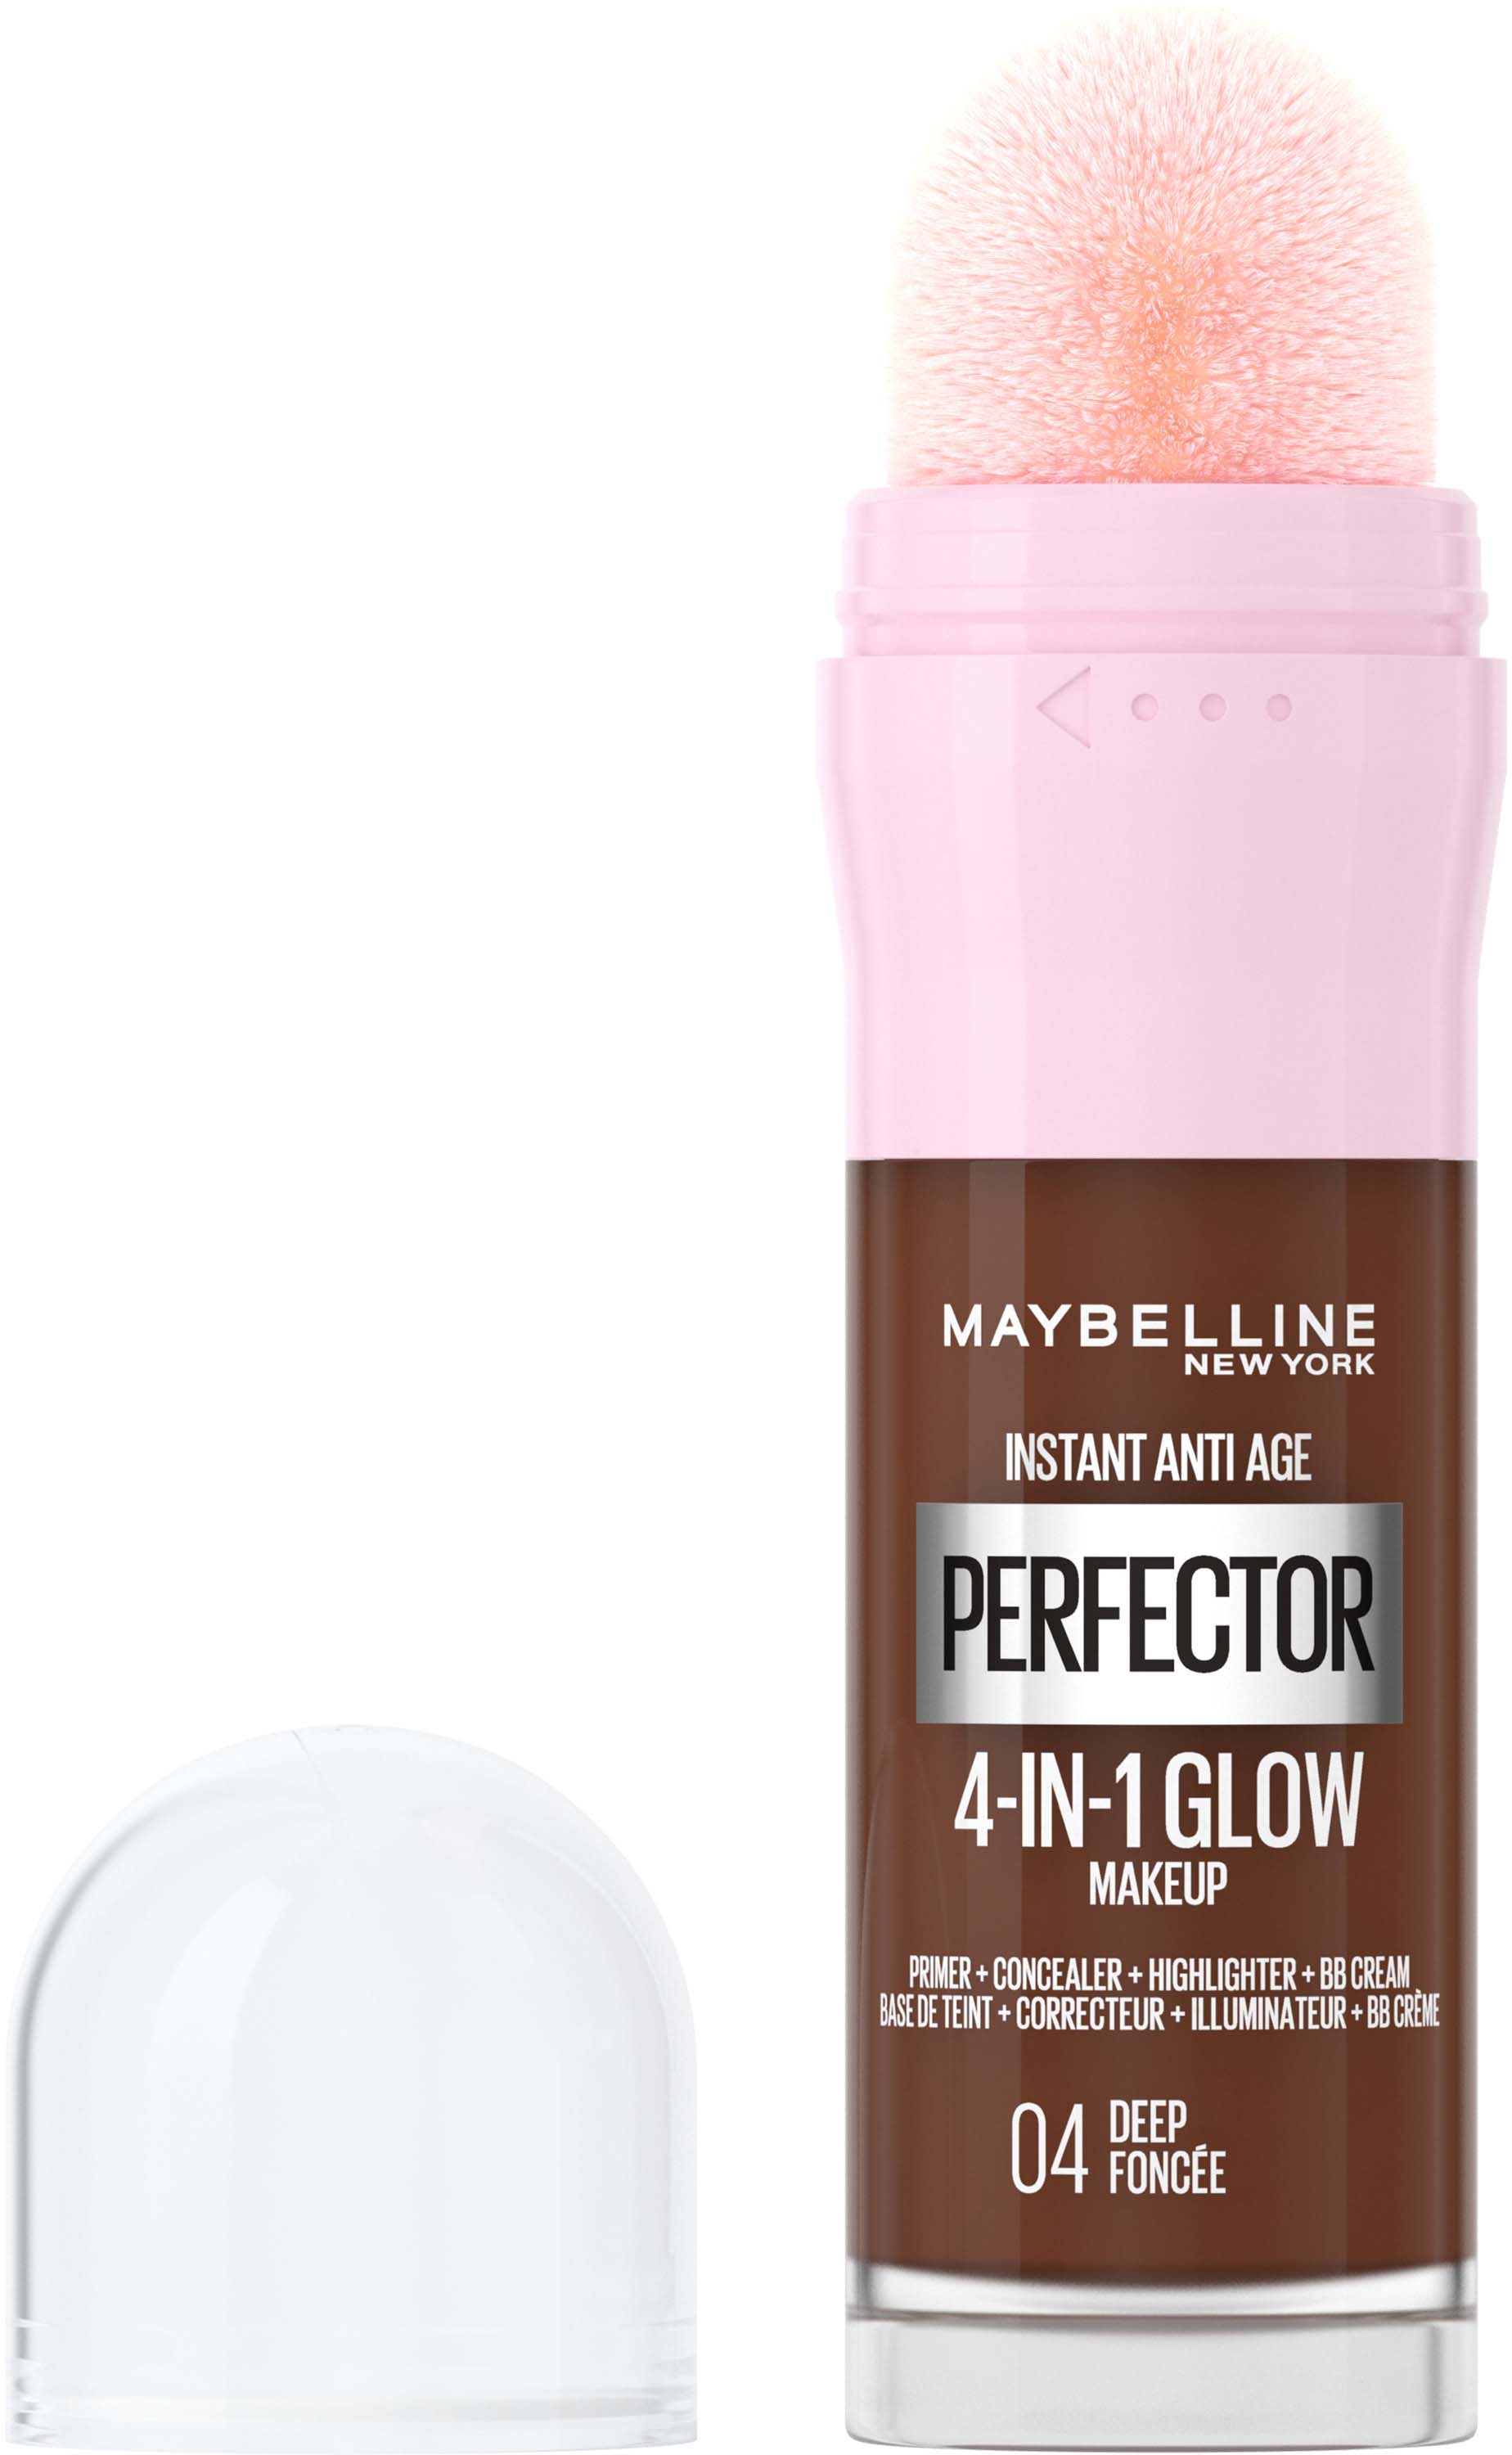 New Glow 4-in-1 Perfector 03 York Anti-Age Medium Maybelline Instant Makeup Deep